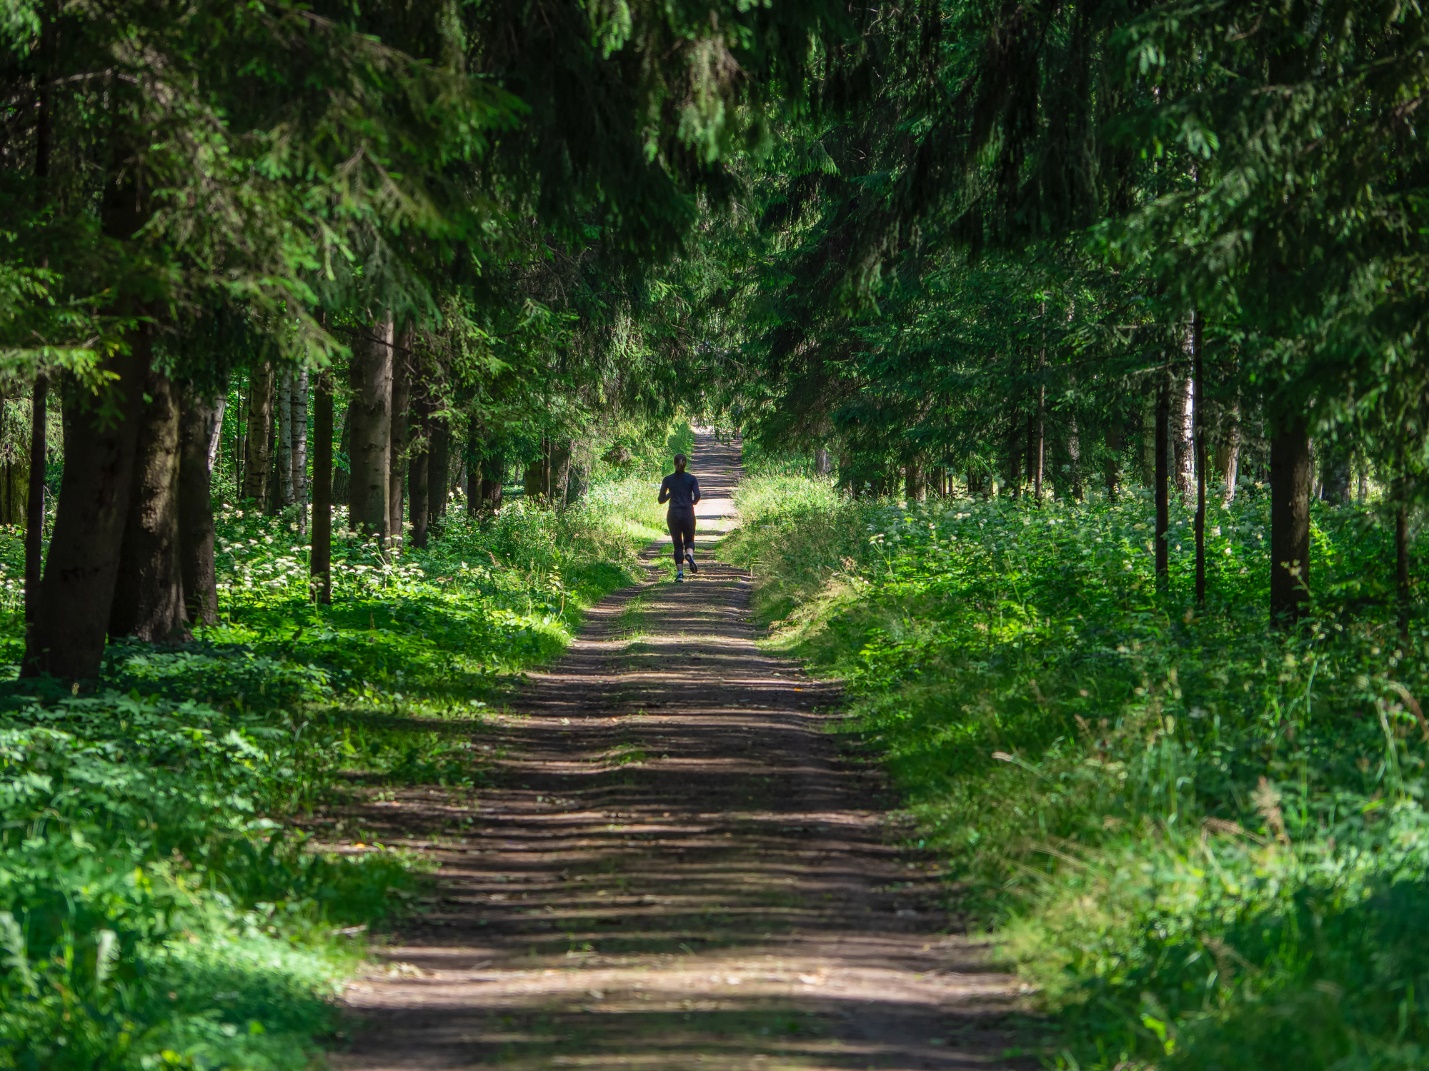 A person walking on a path in a forest

Description automatically generated with low confidence